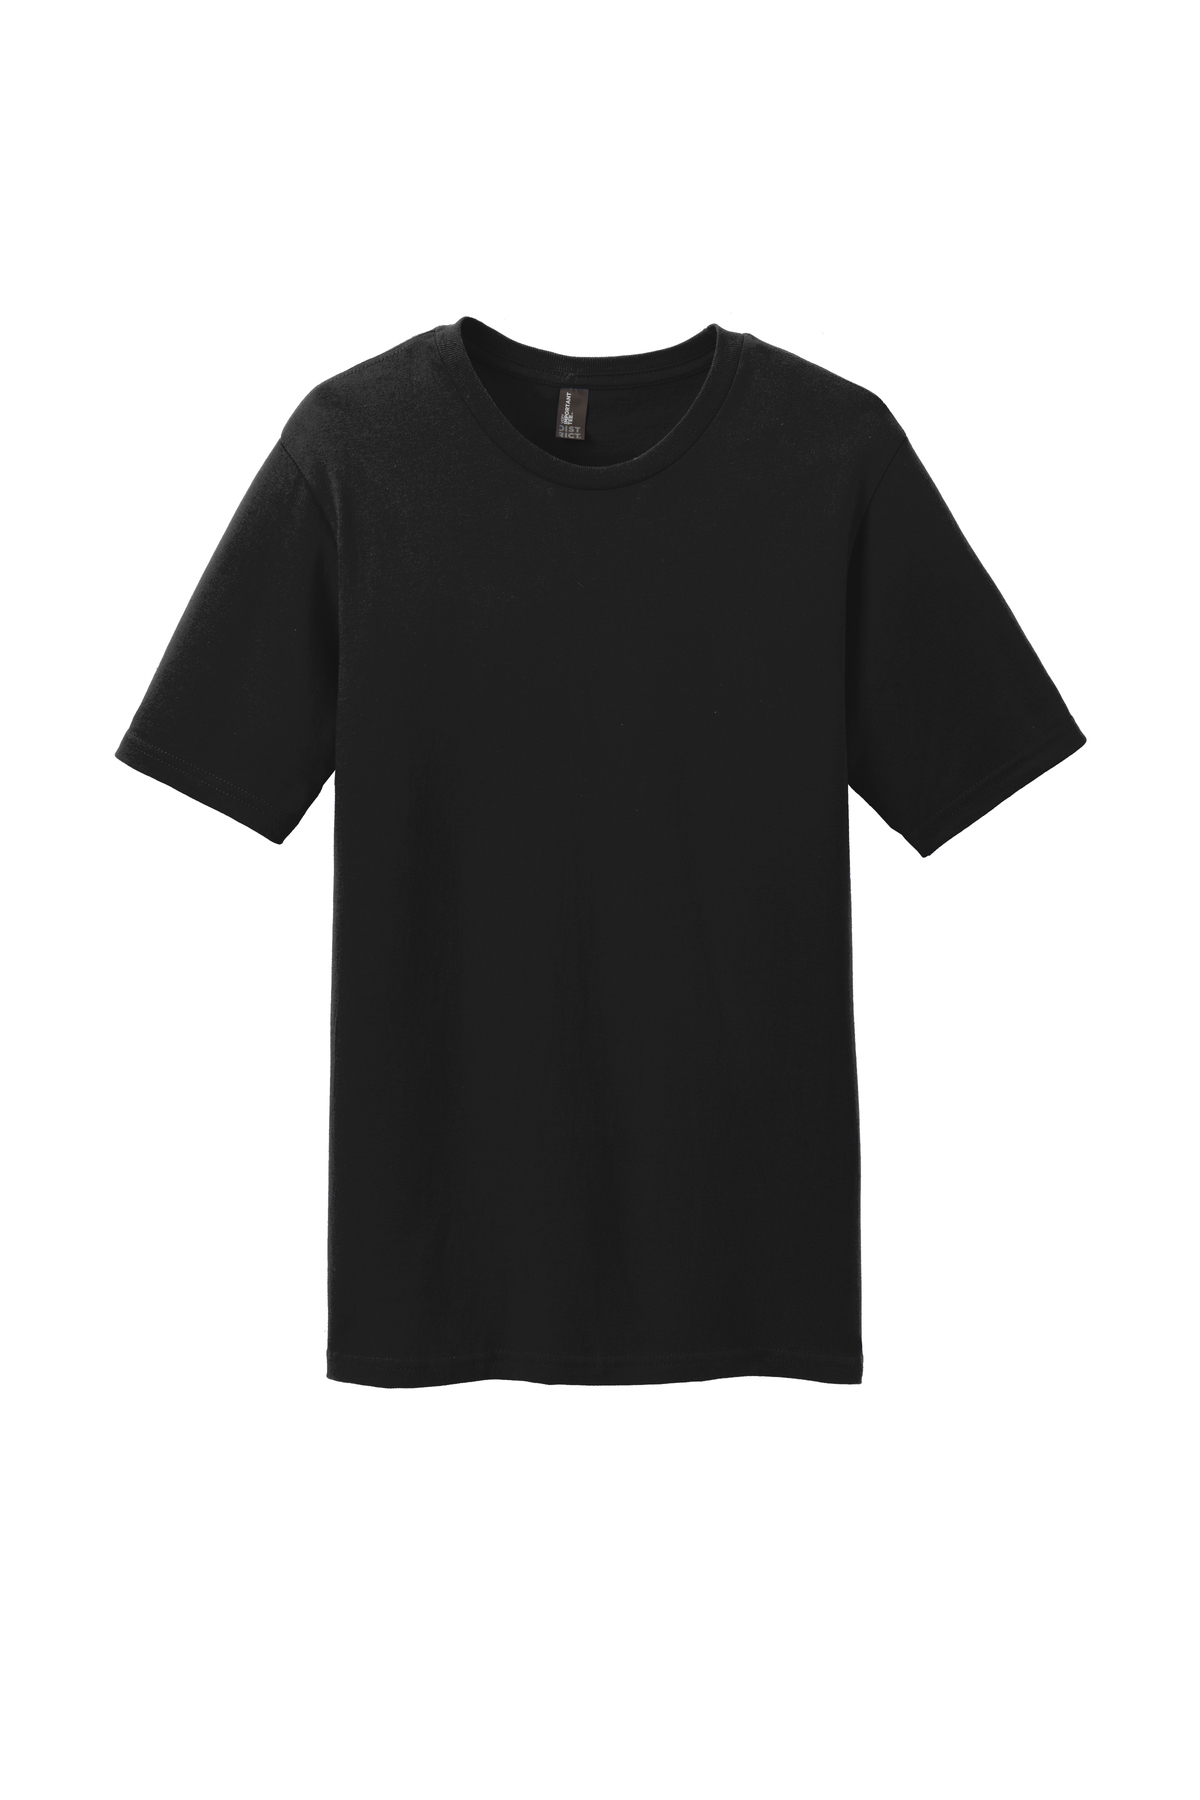 District ® Young Mens Bouncer Tee | Product | SanMar